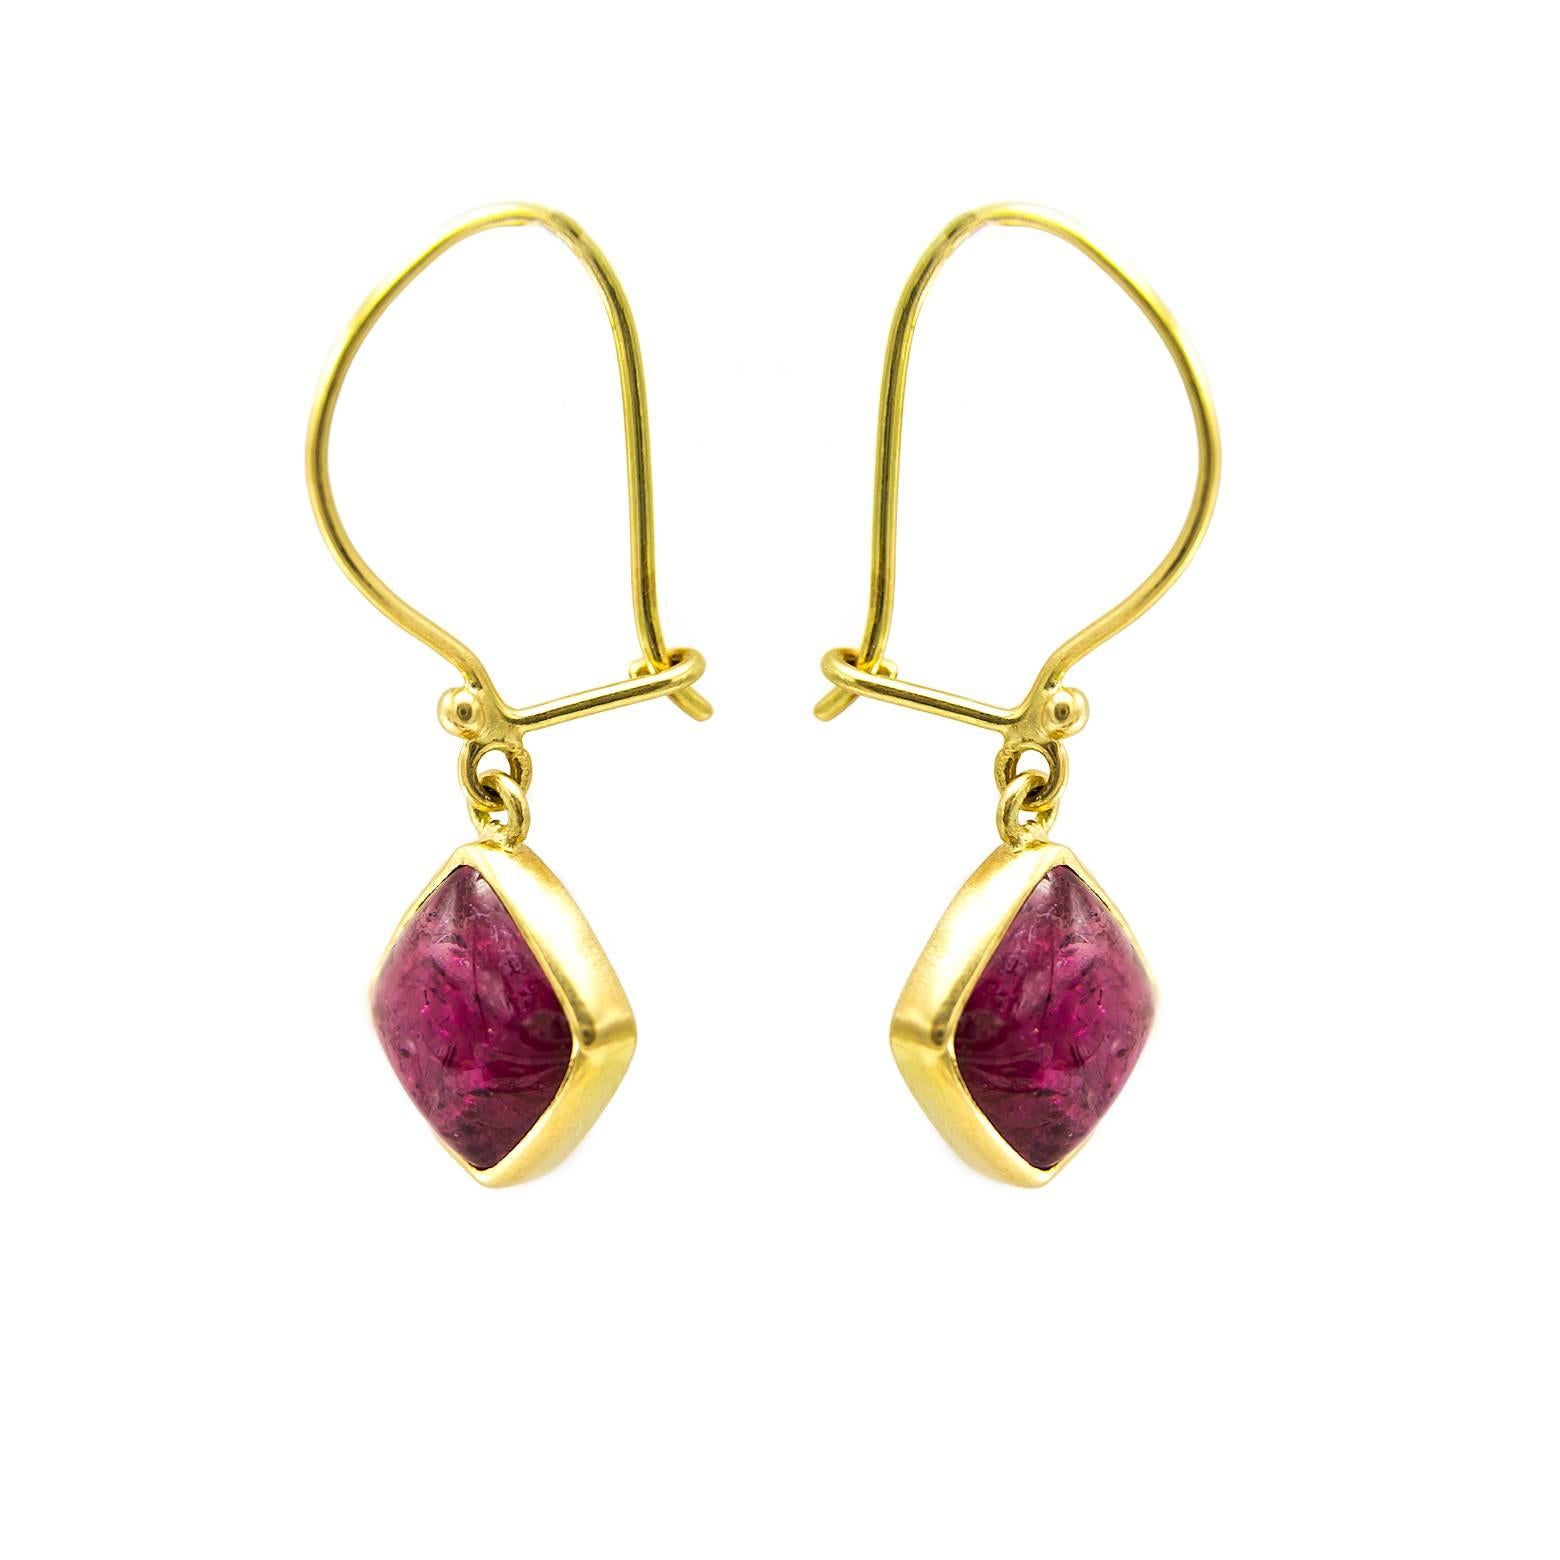 These bright pink tourmaline earrings are simple in design and the stones are absolutely gorgeous. The 18K yellow gold bezel holds these earring in a brilliant  manner so that the stones and swing and sway to capture and reflect more light. 